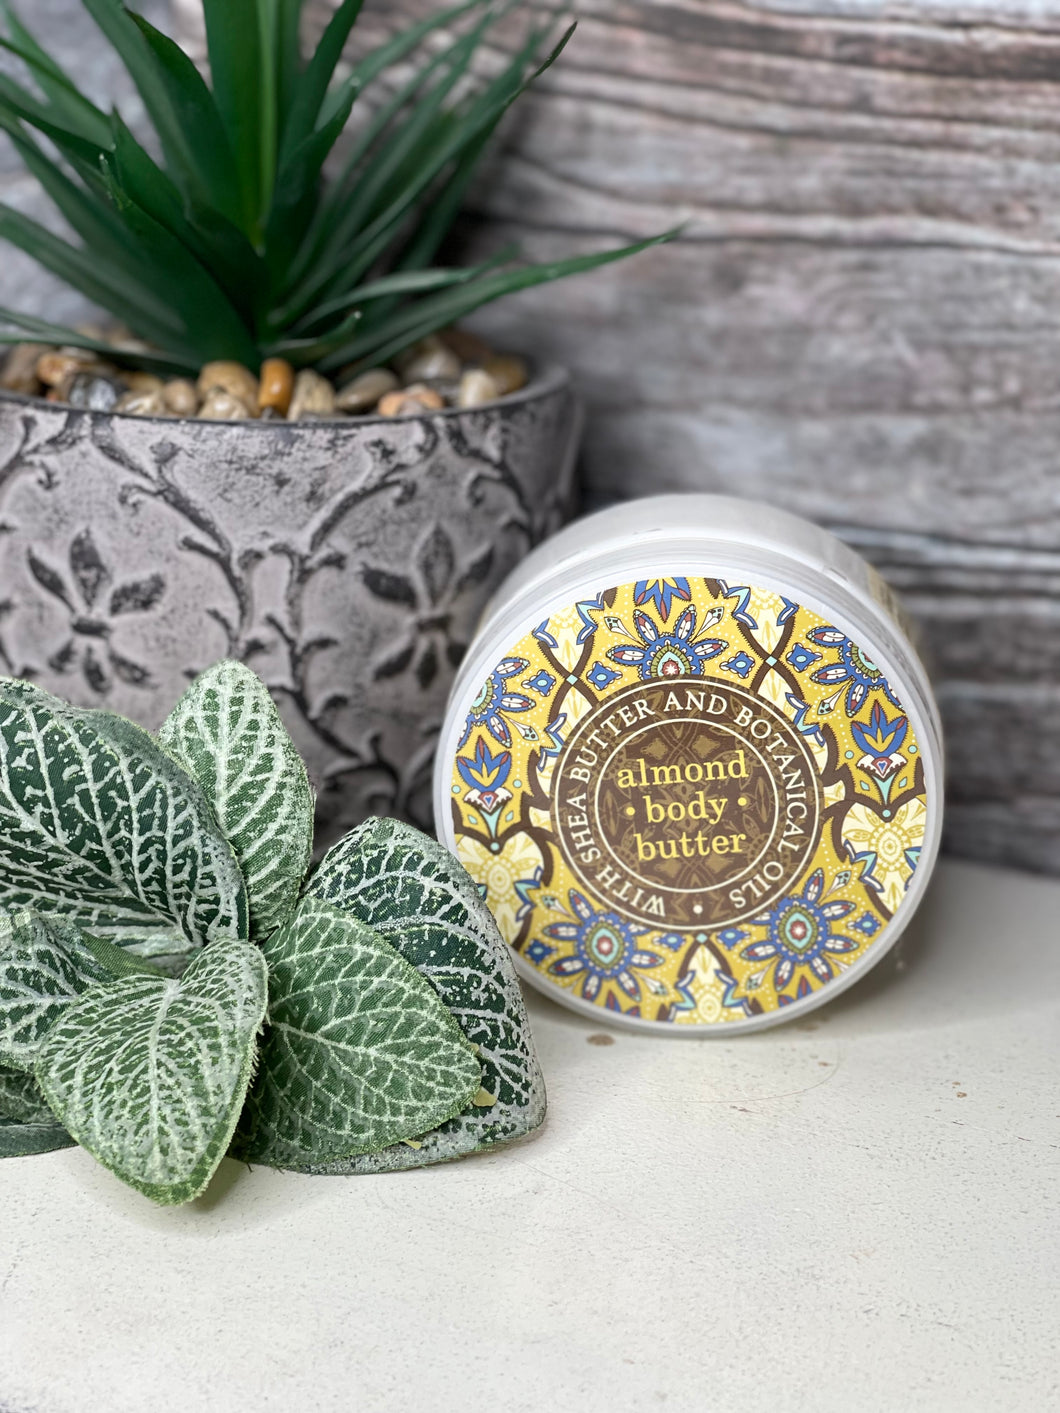 Botanical Body Butter - Almond Cocoa